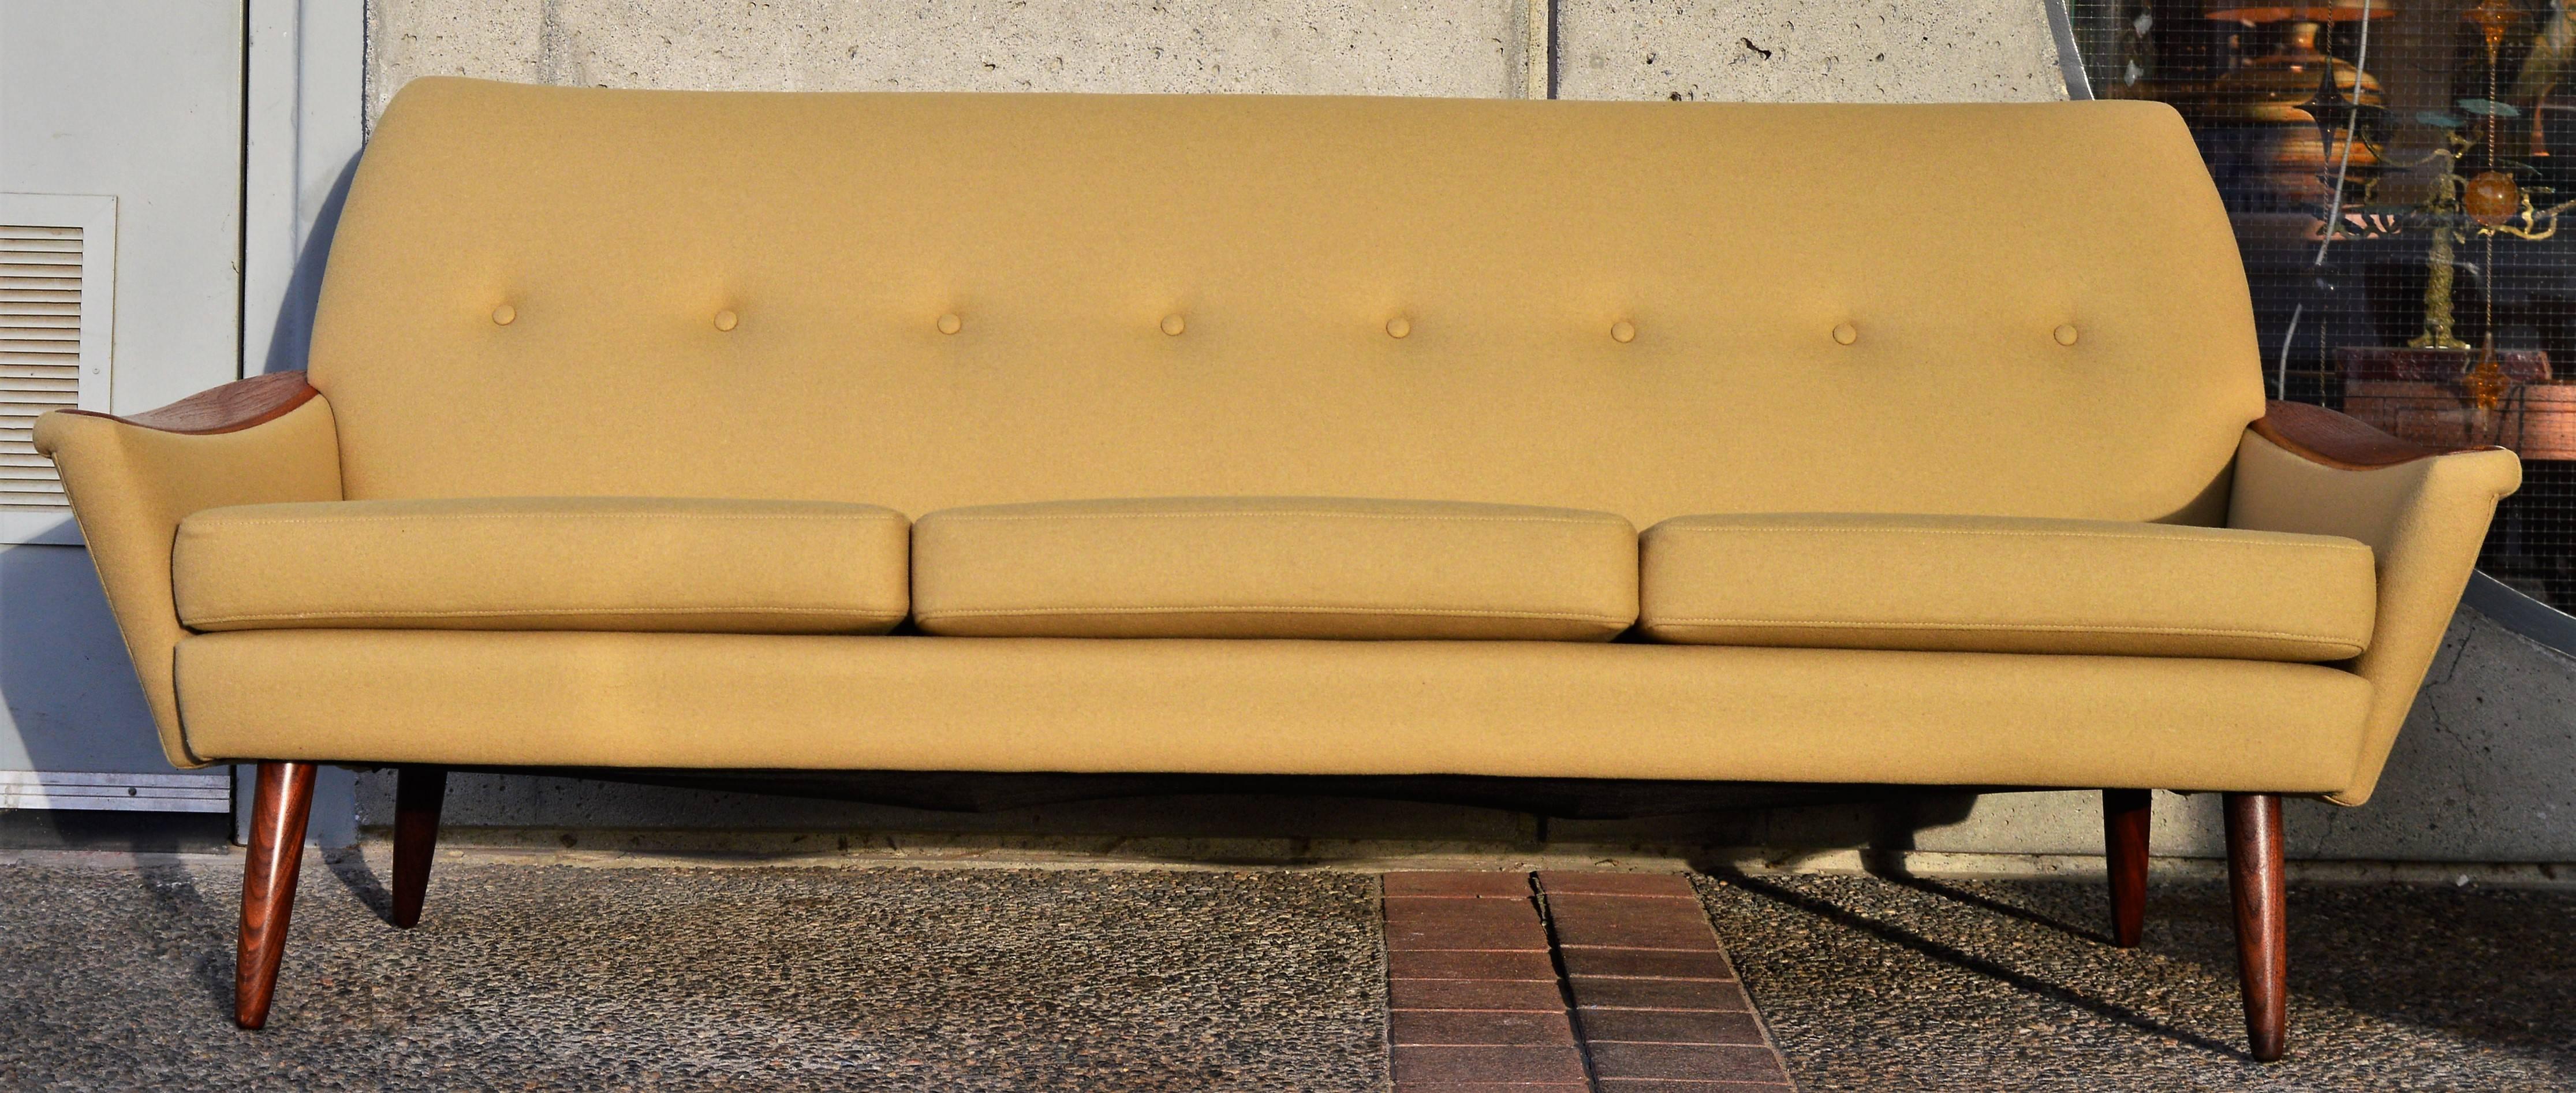 Teak Arm Restored Button-Tufted Sofa in Camel Felted Wool 2